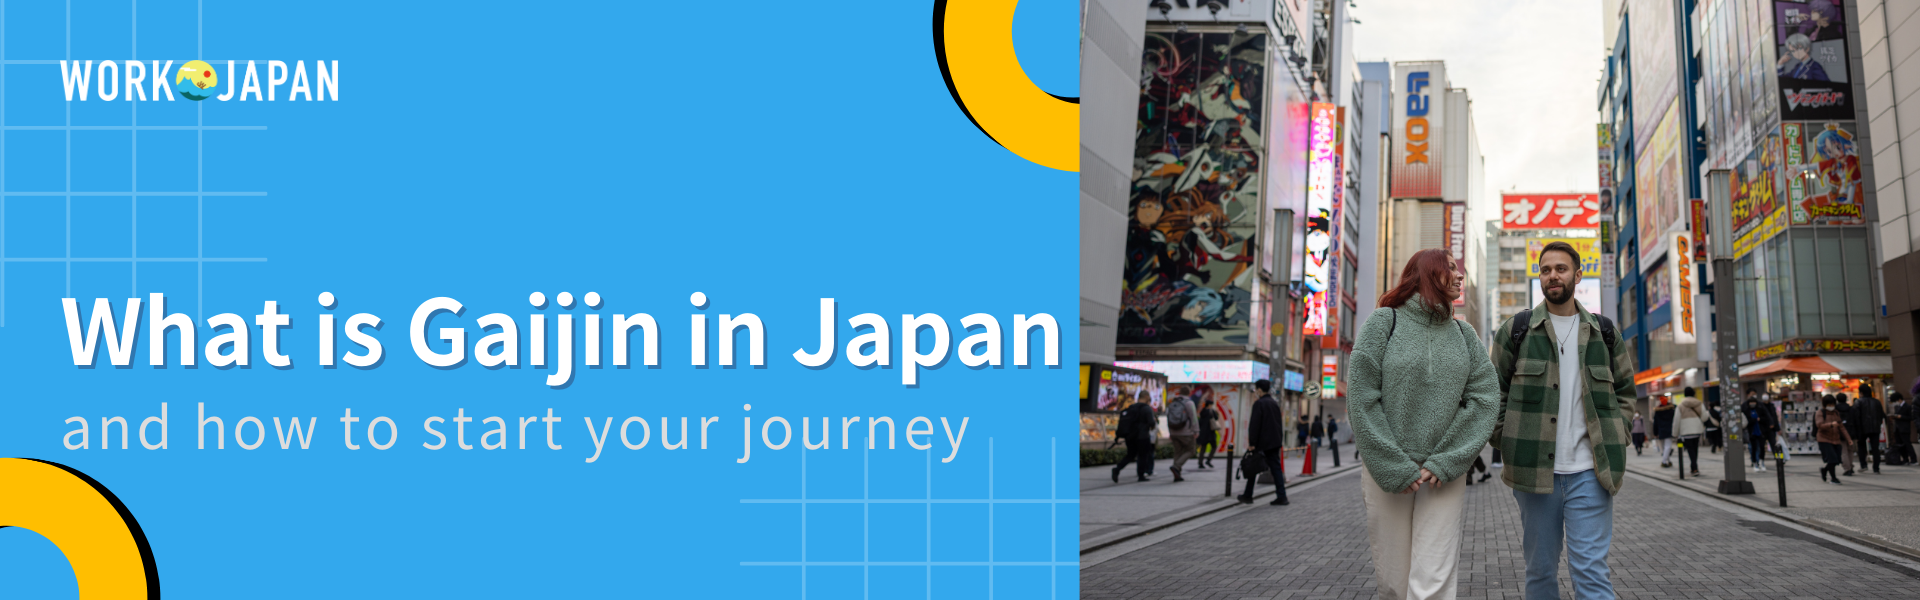 What is a Gaijin in Japan and how to start your journey